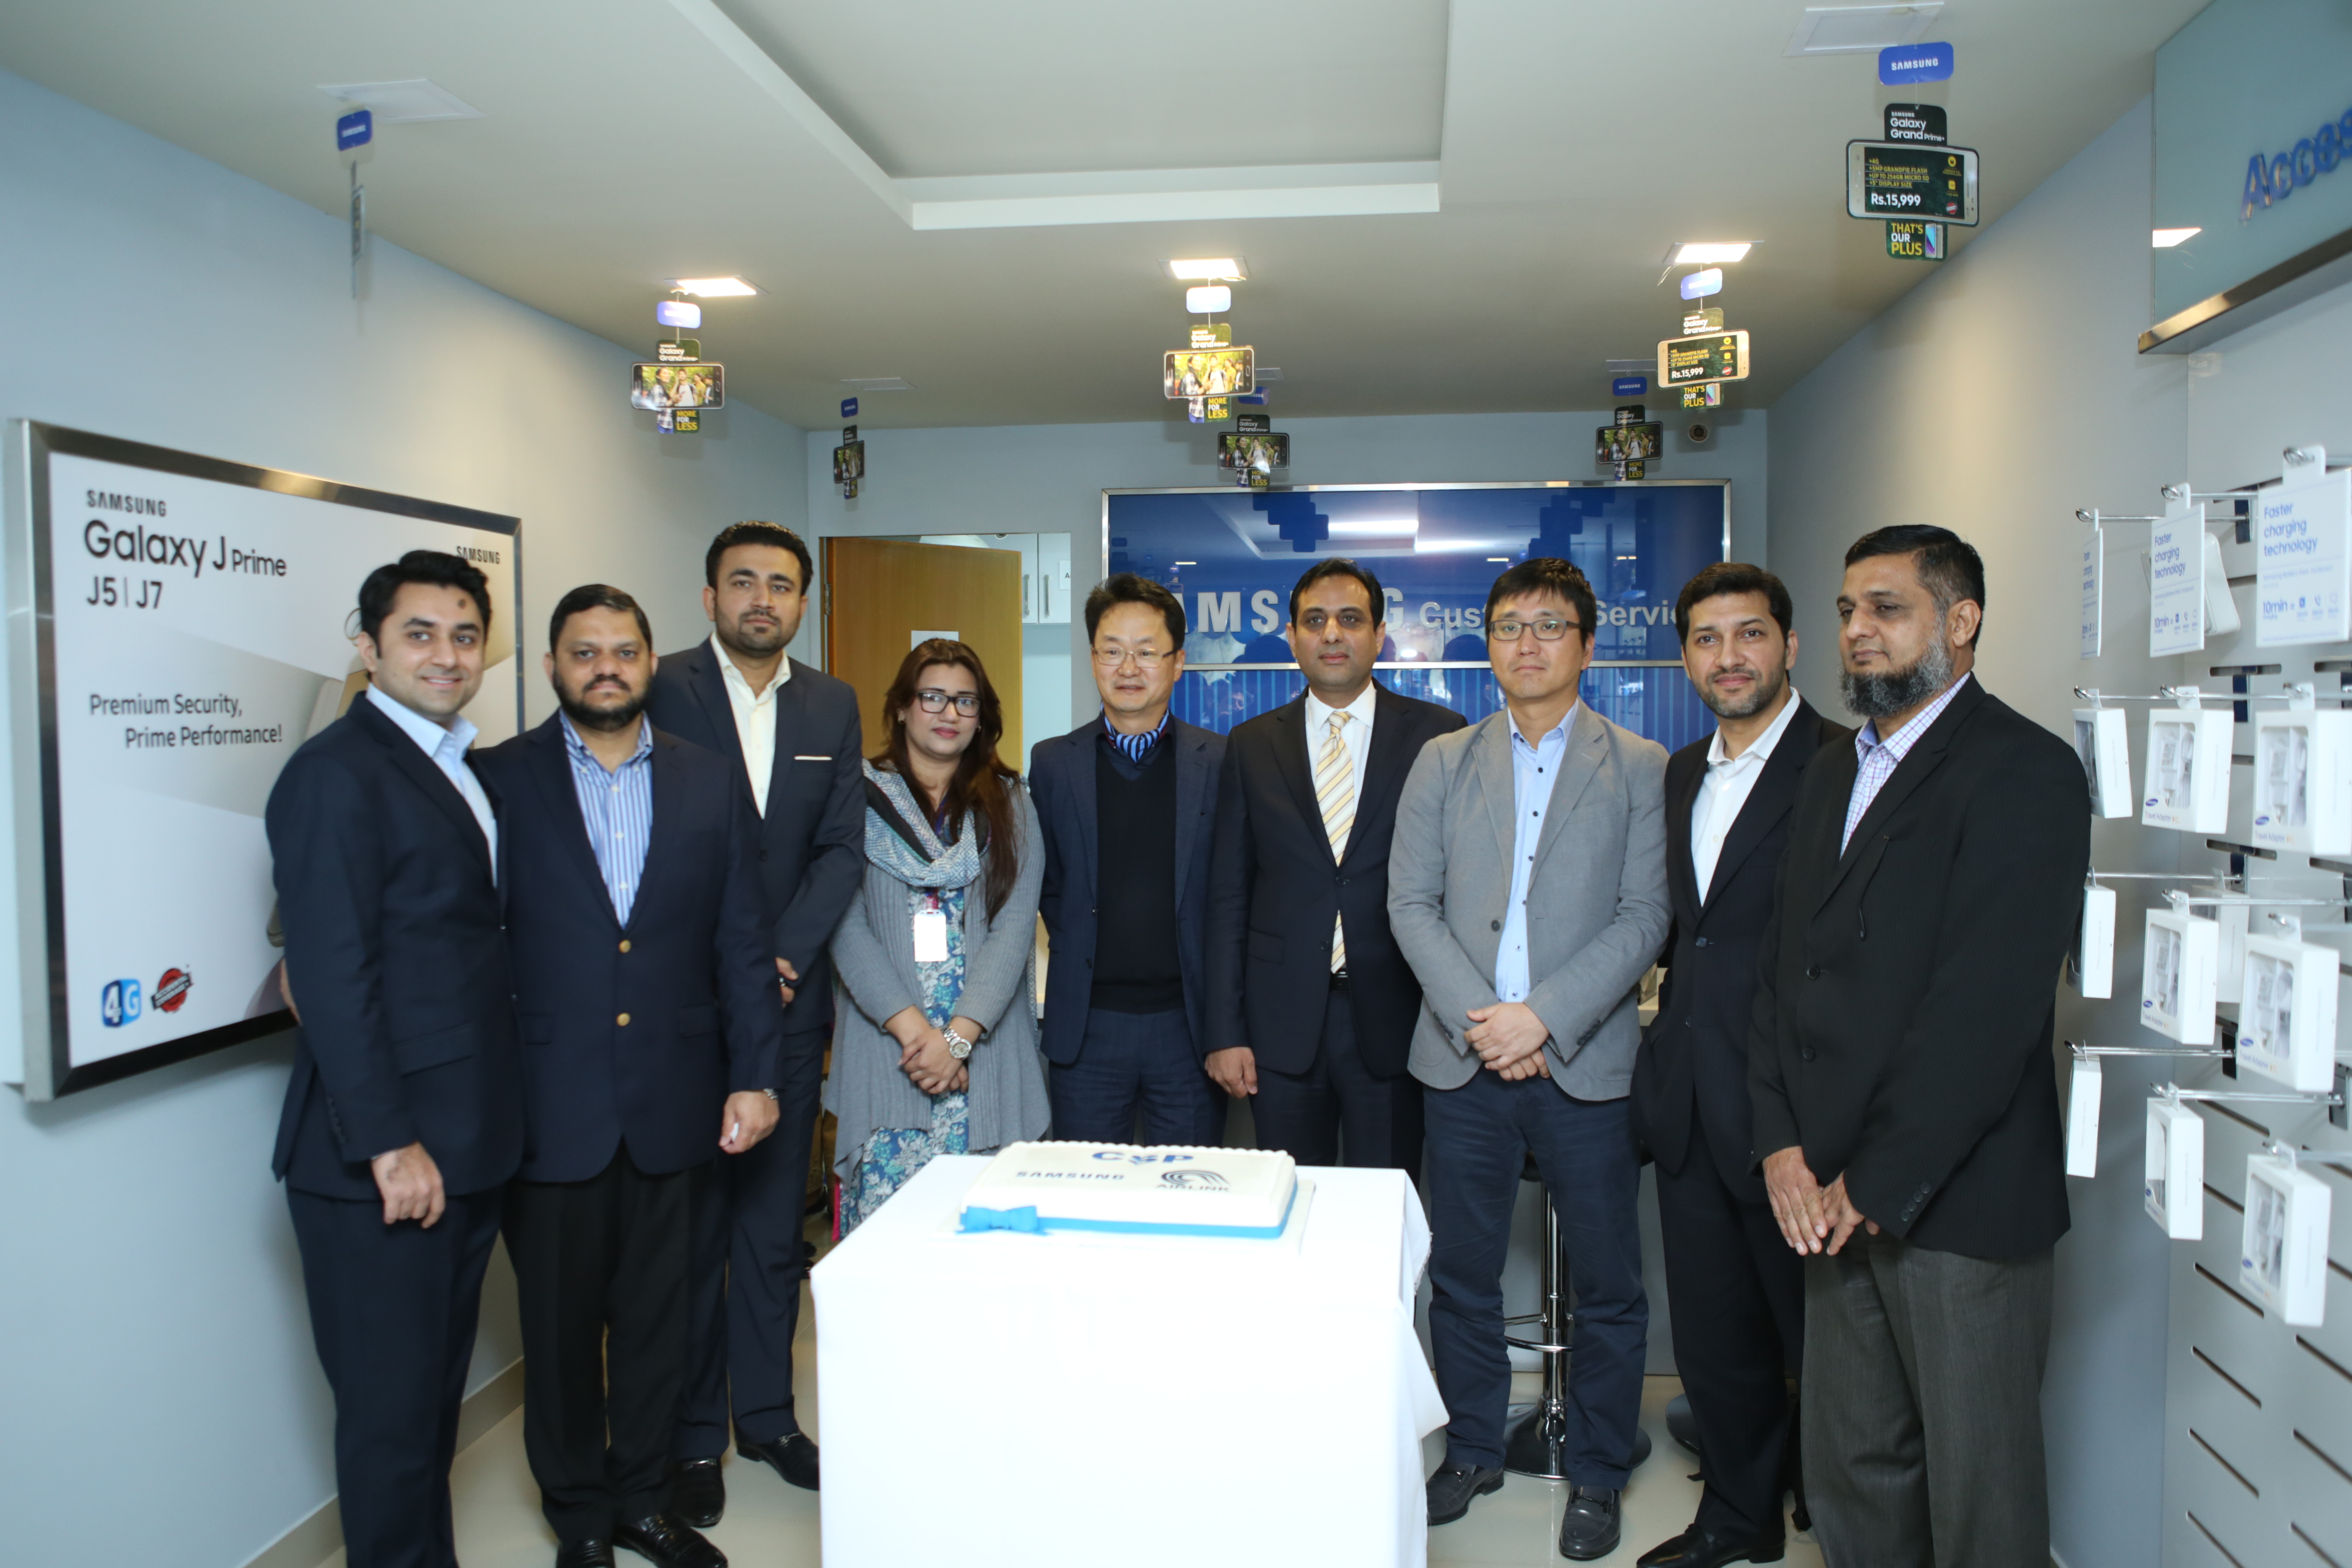 Mr. J. H. Lee and other members of Samsung Pakistan at the launch of Service Center in Islamabad